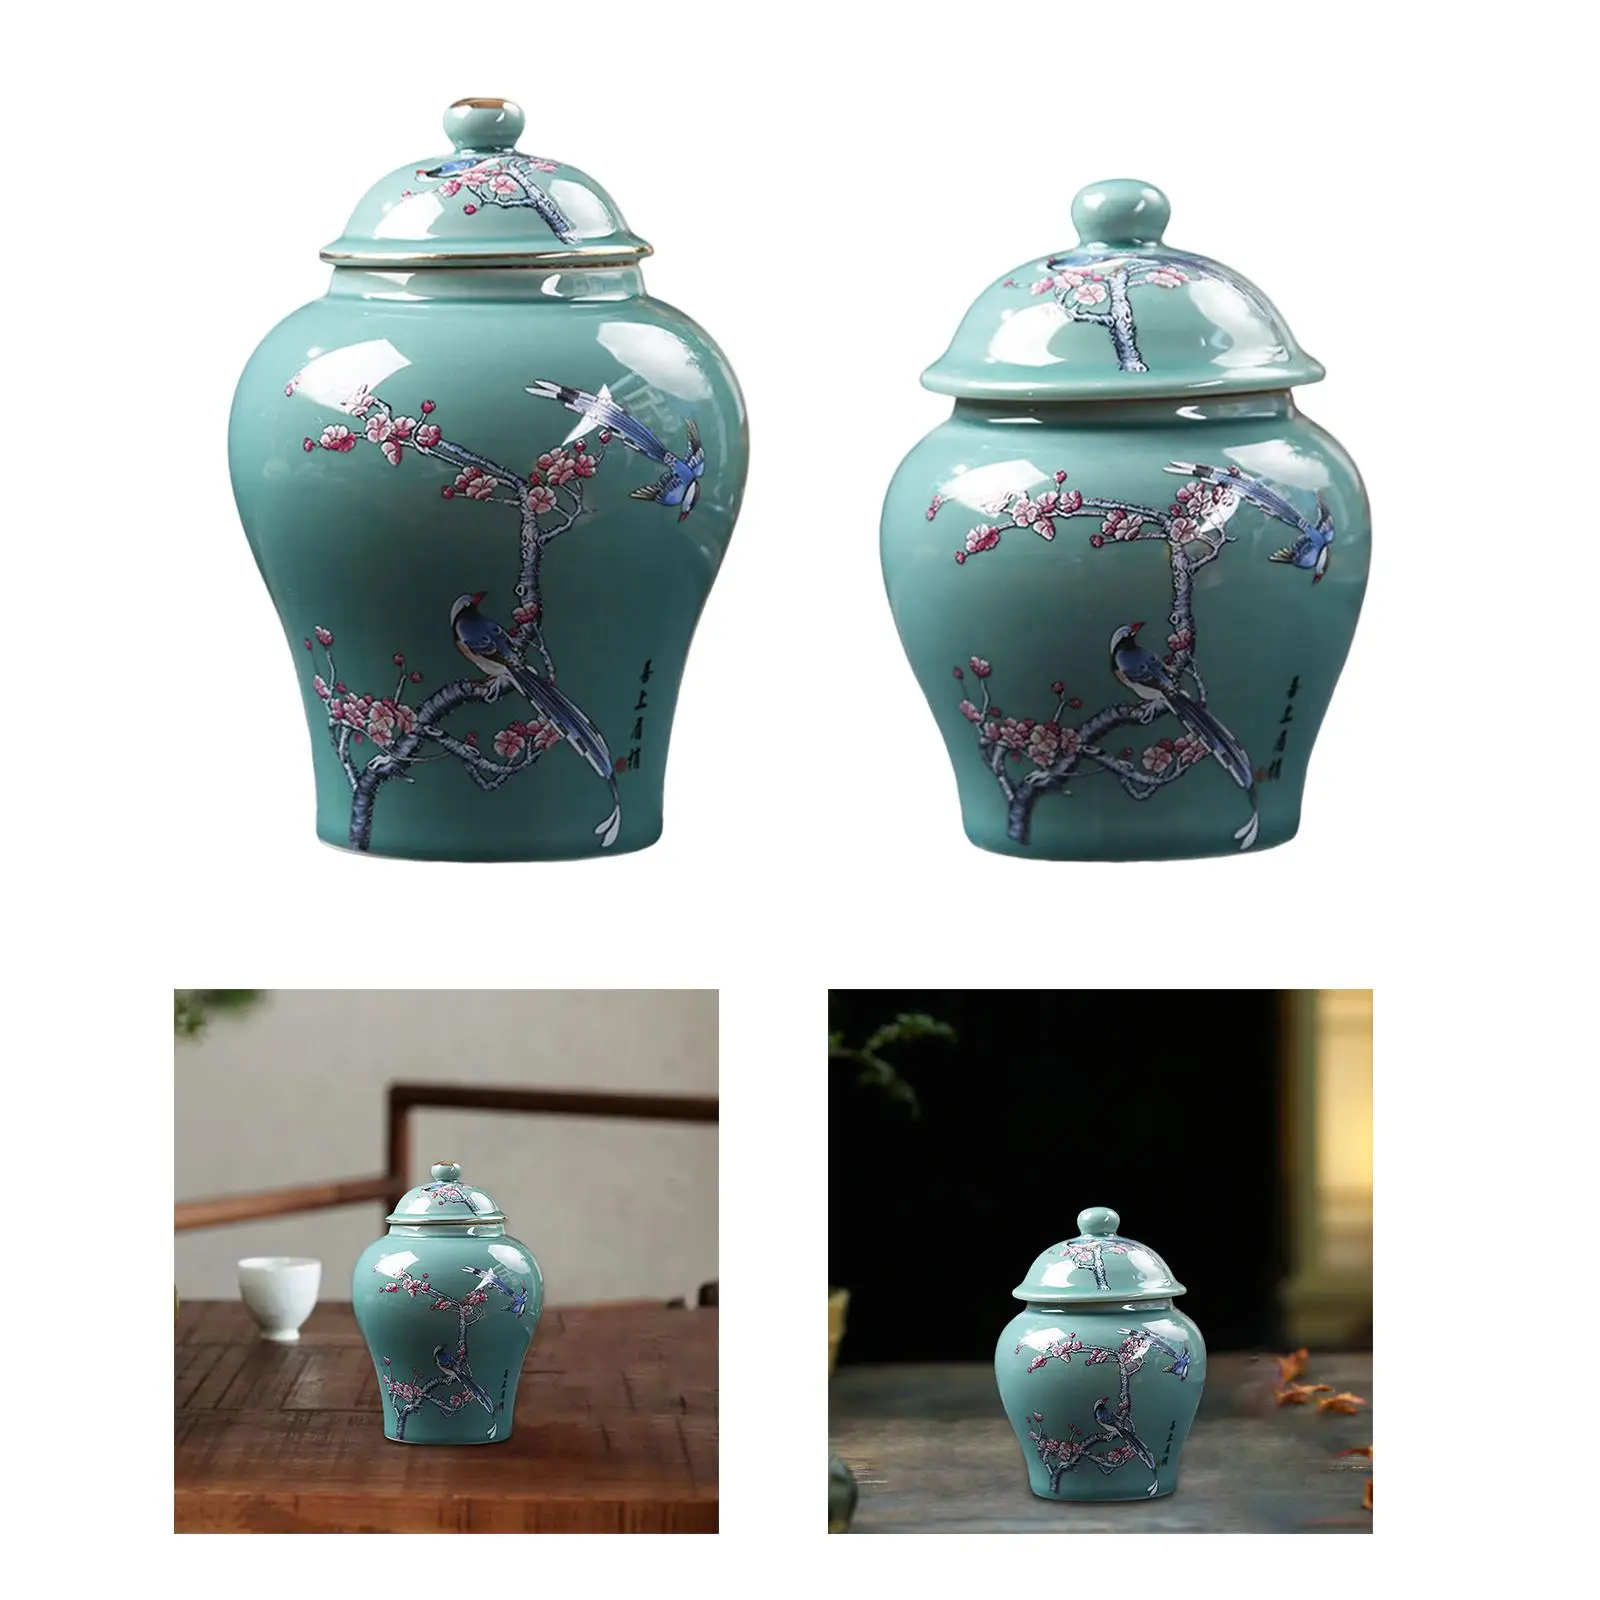 Painted Flower Ceramic Ginger Jar Gift with Airtight Lid Chinese Style Multiuse Table Decorative Jar Storage Jars for Loose Tea